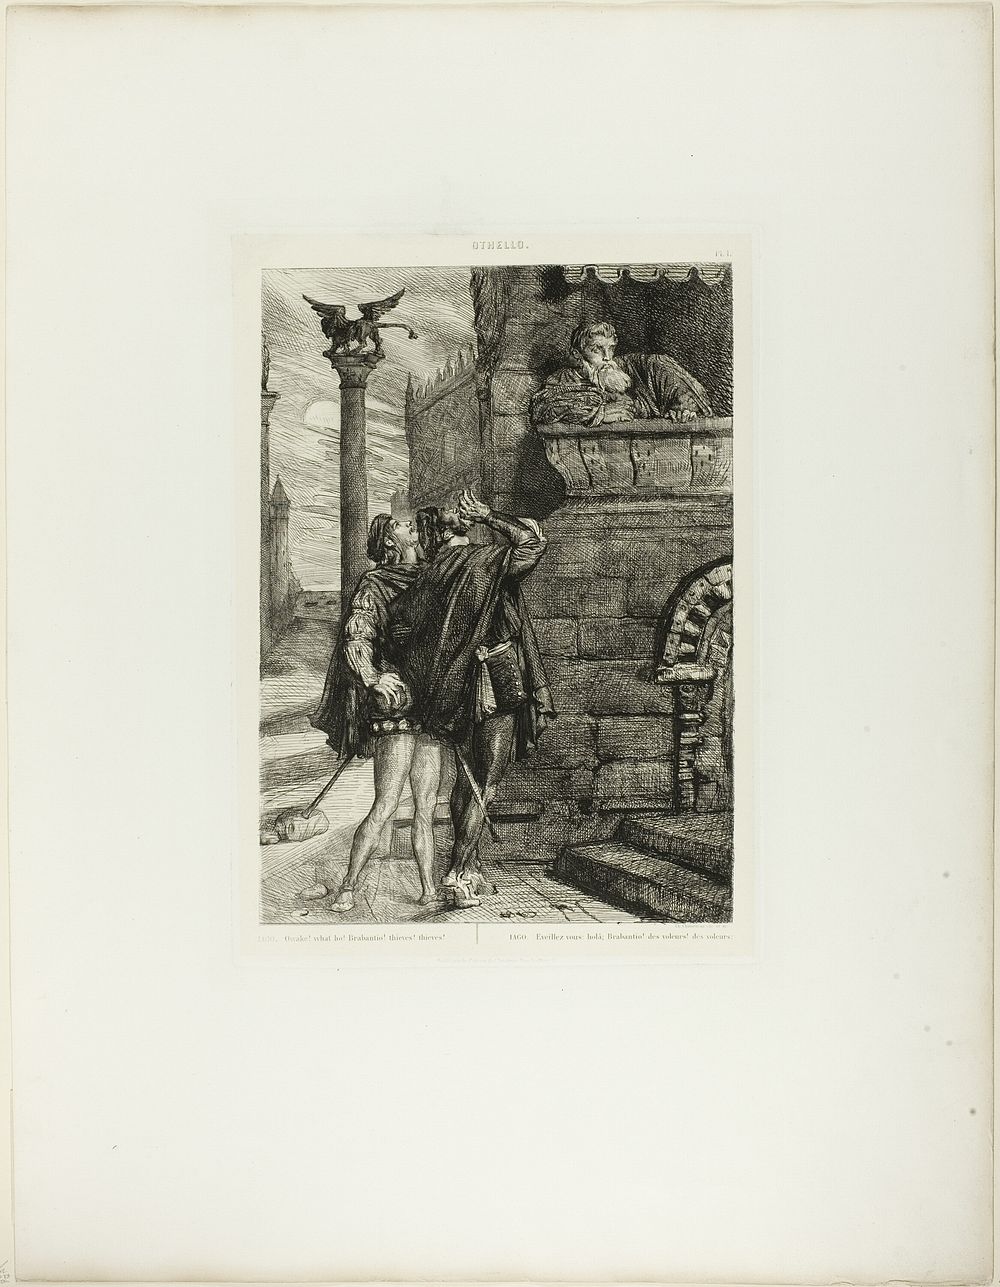 Owake! What Ho! Brabantio!plate 1 (act 1, scene 1) from Othello by Théodore Chassériau